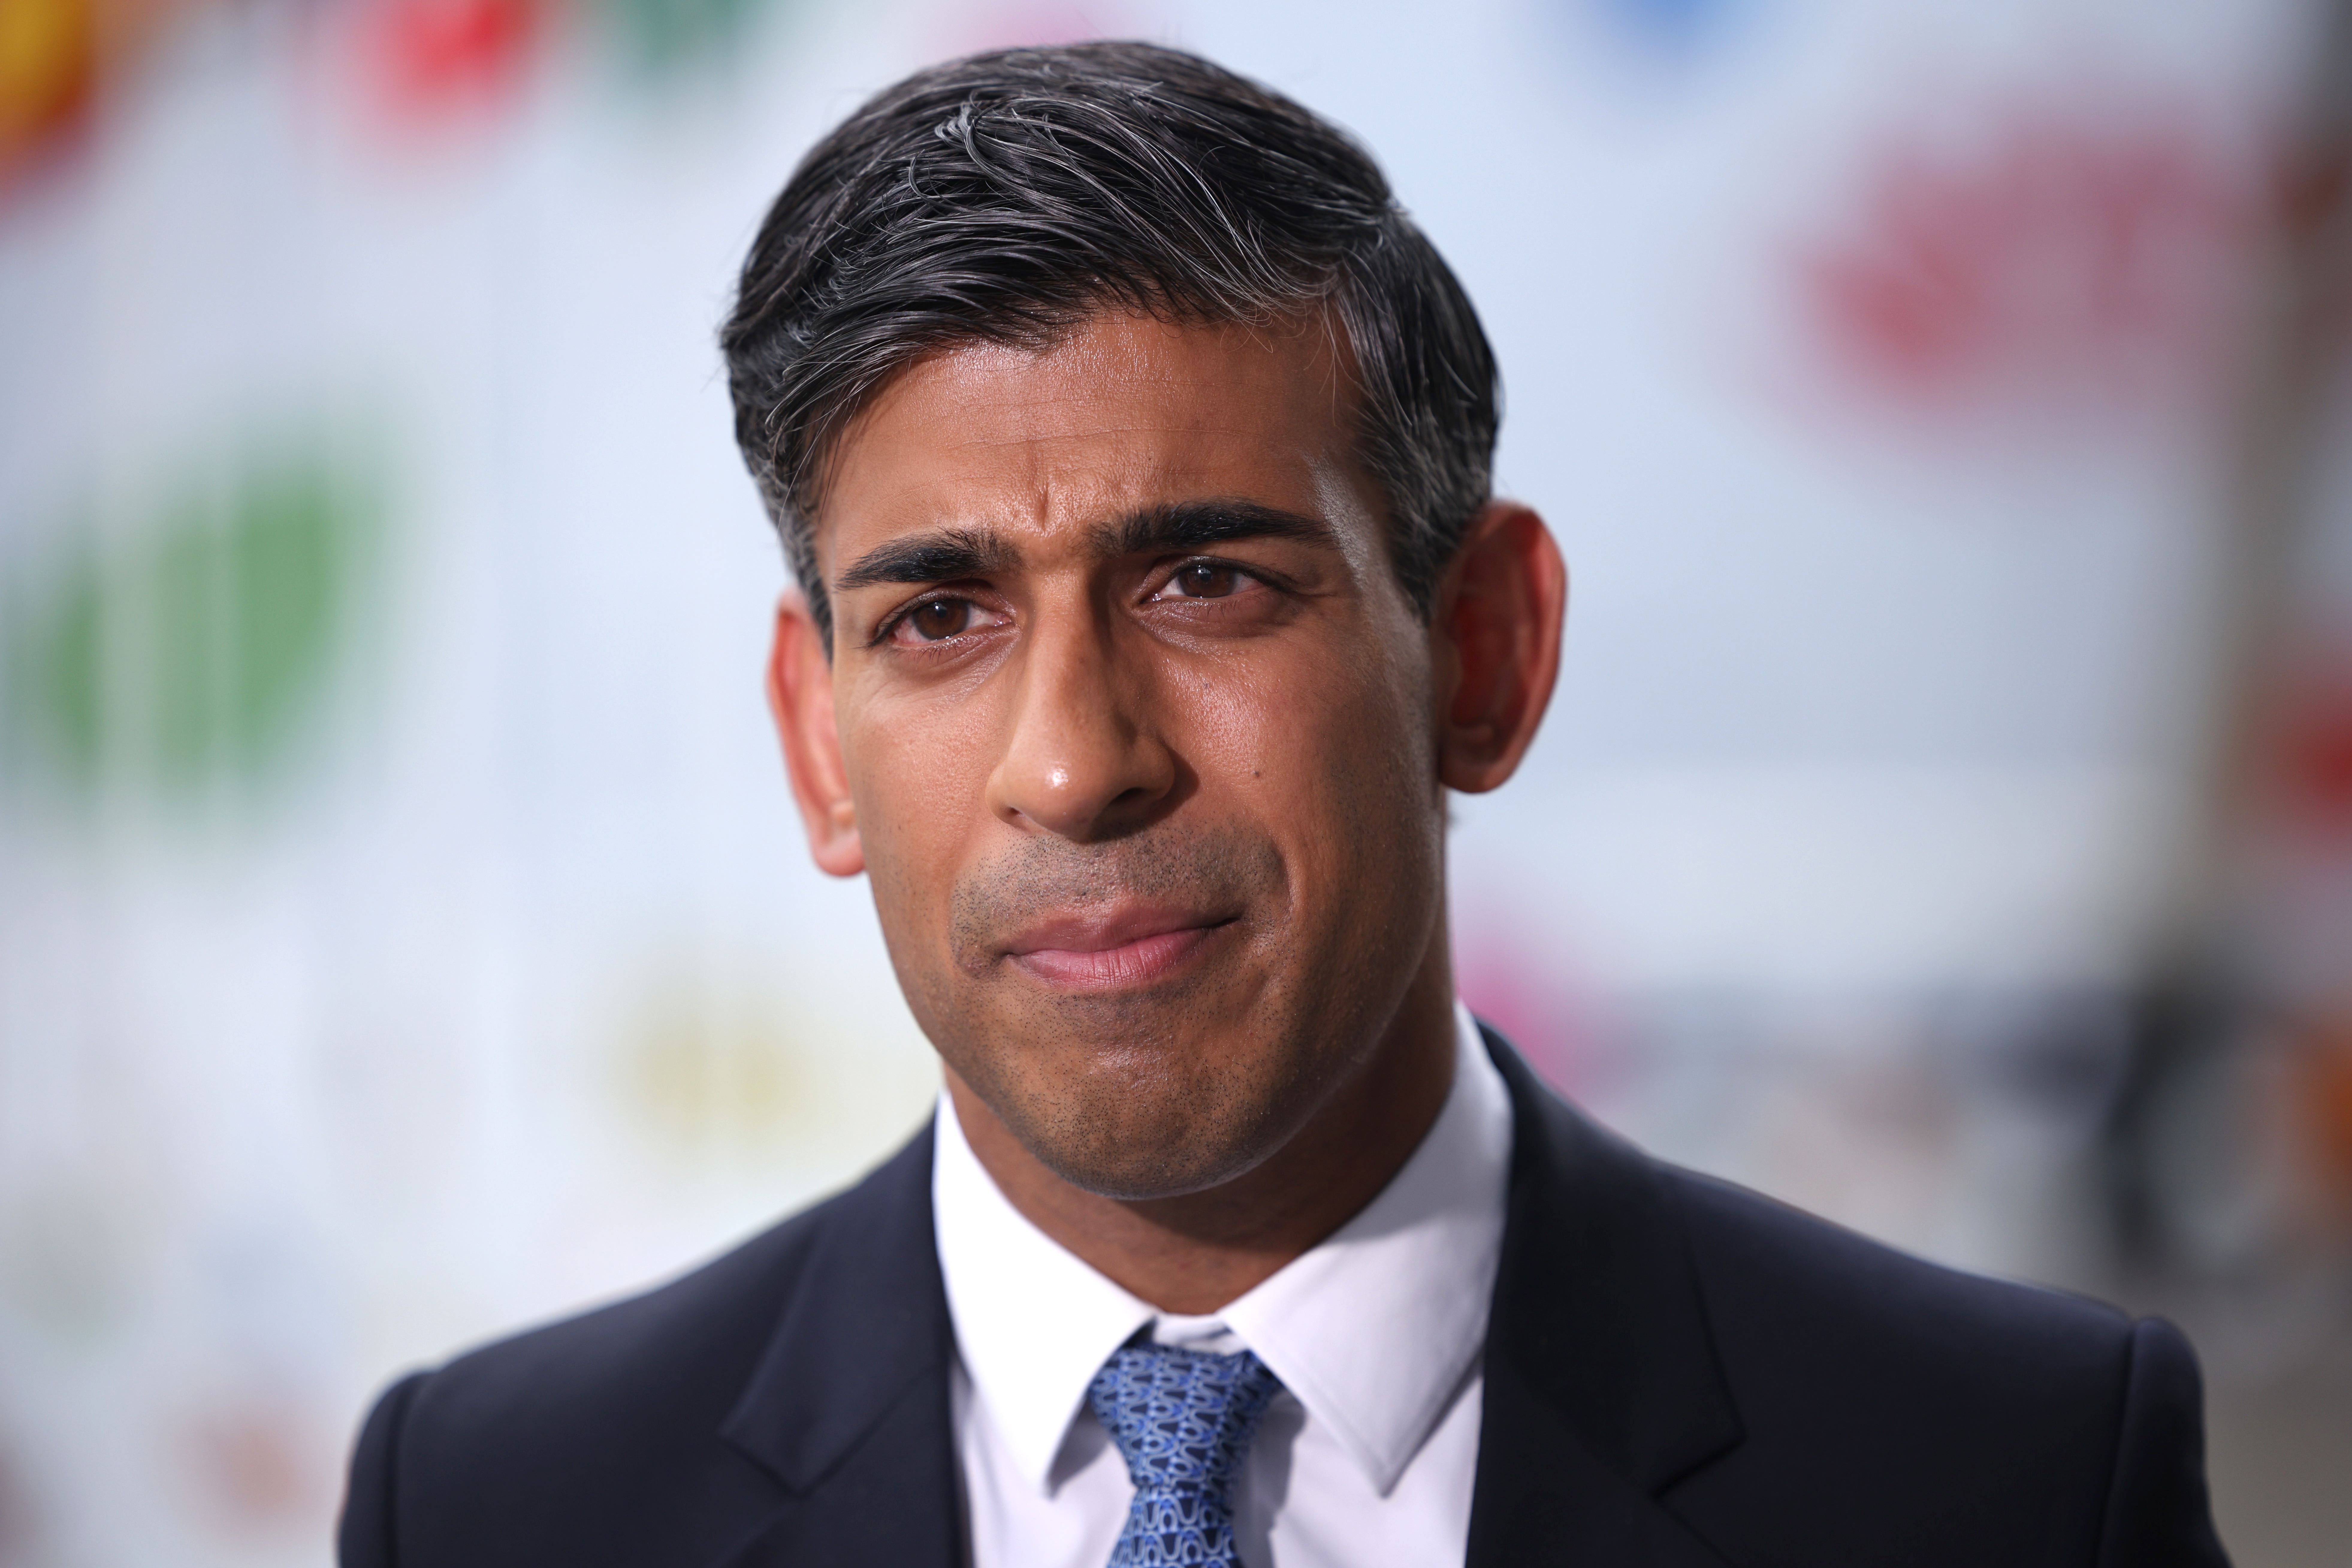 Rishi Sunak is under pressure to take tougher stance on China